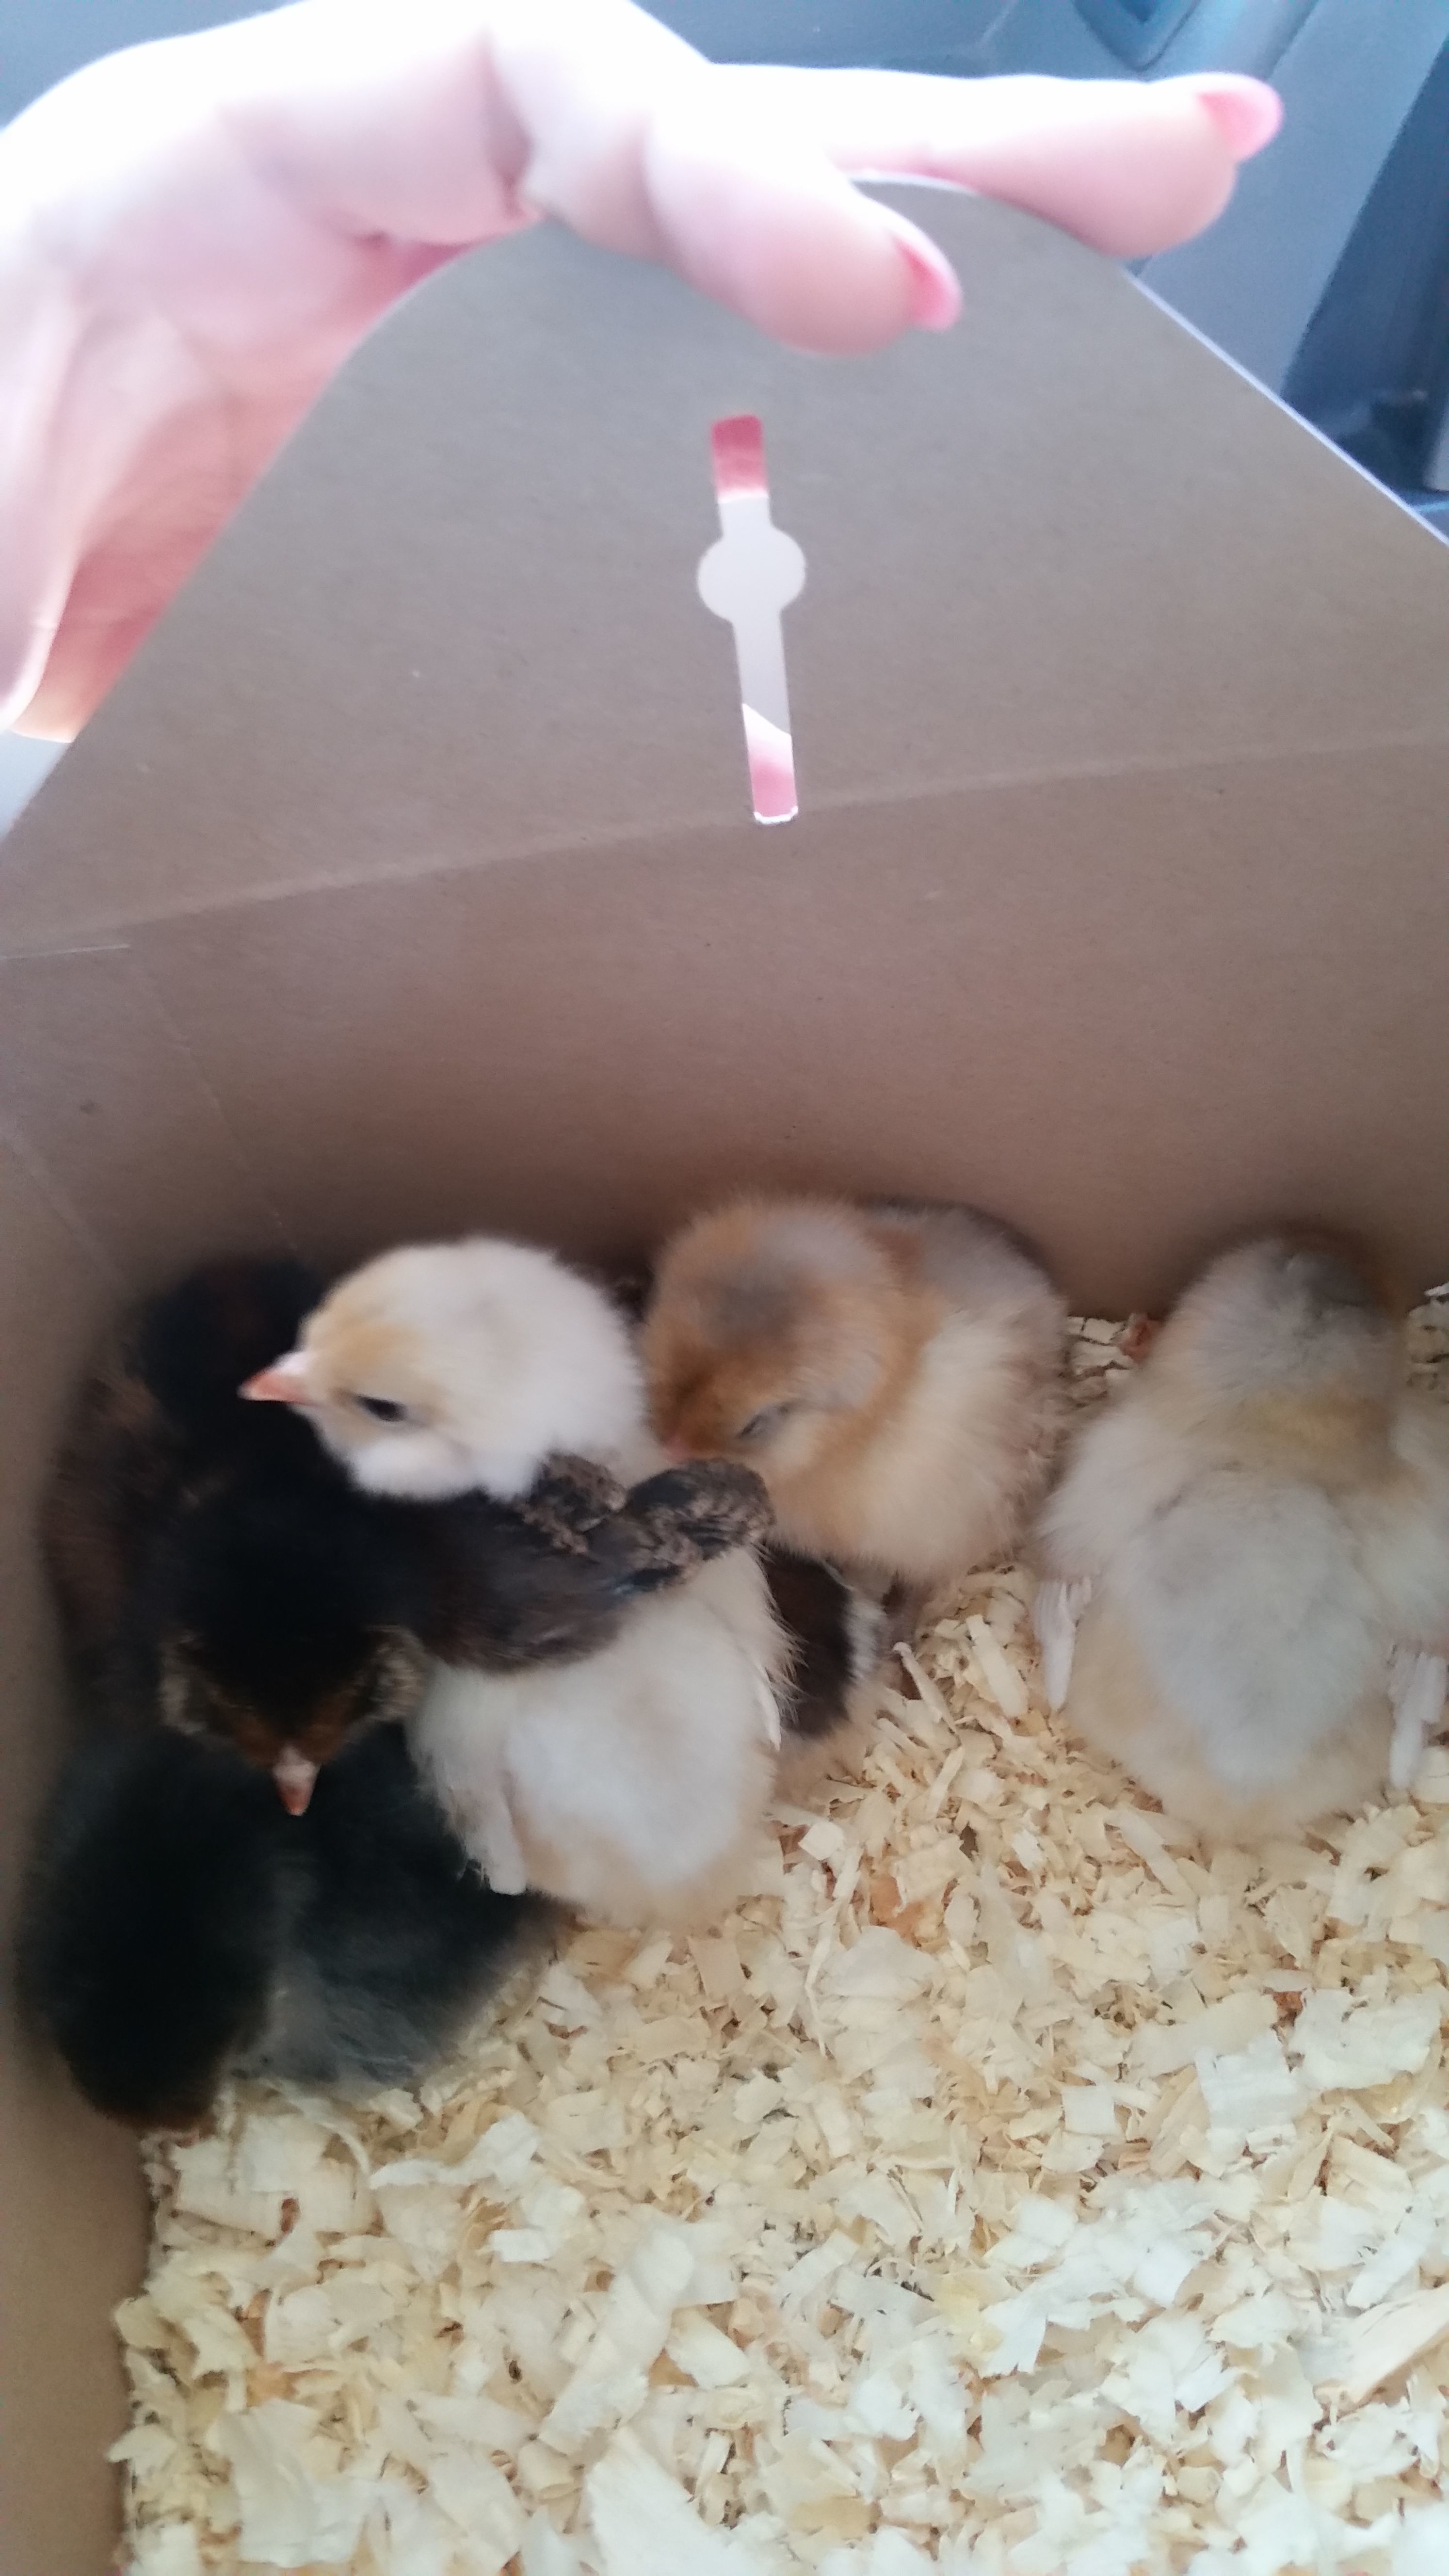 When they first came home in their box